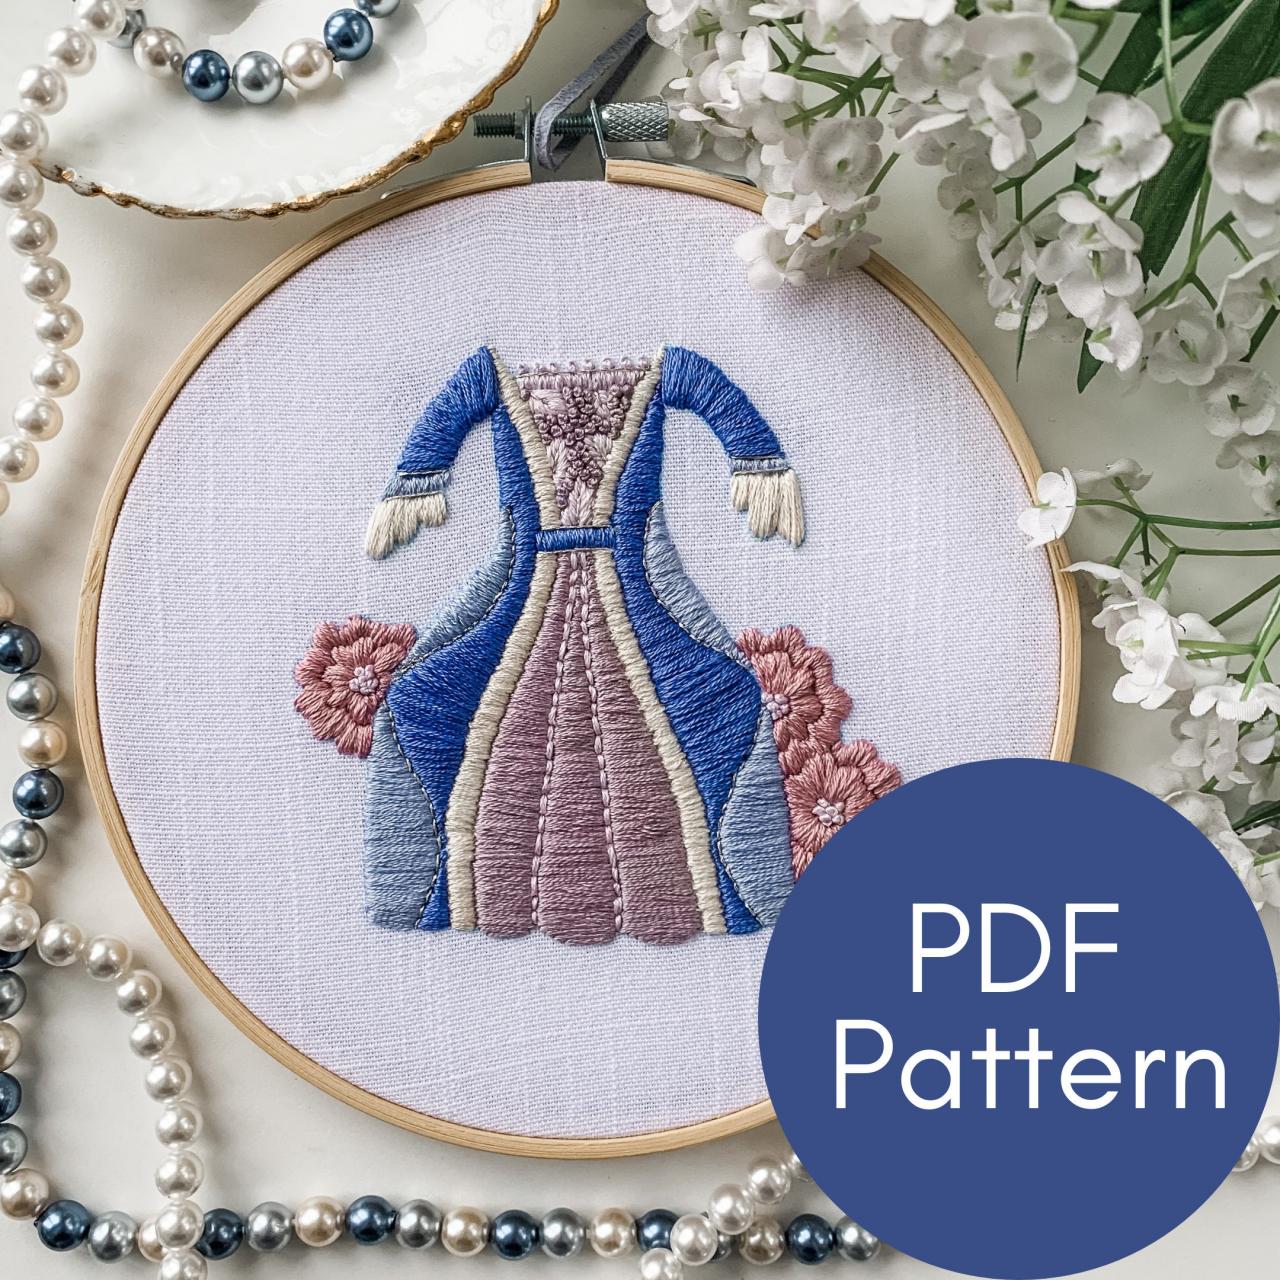 1770s Dress Hand Embroidery Pattern | Fancy Dress Embroidery | Modern Embroidery | Bridgerton-Inspired | Gown | Learn Embroidery | Florals